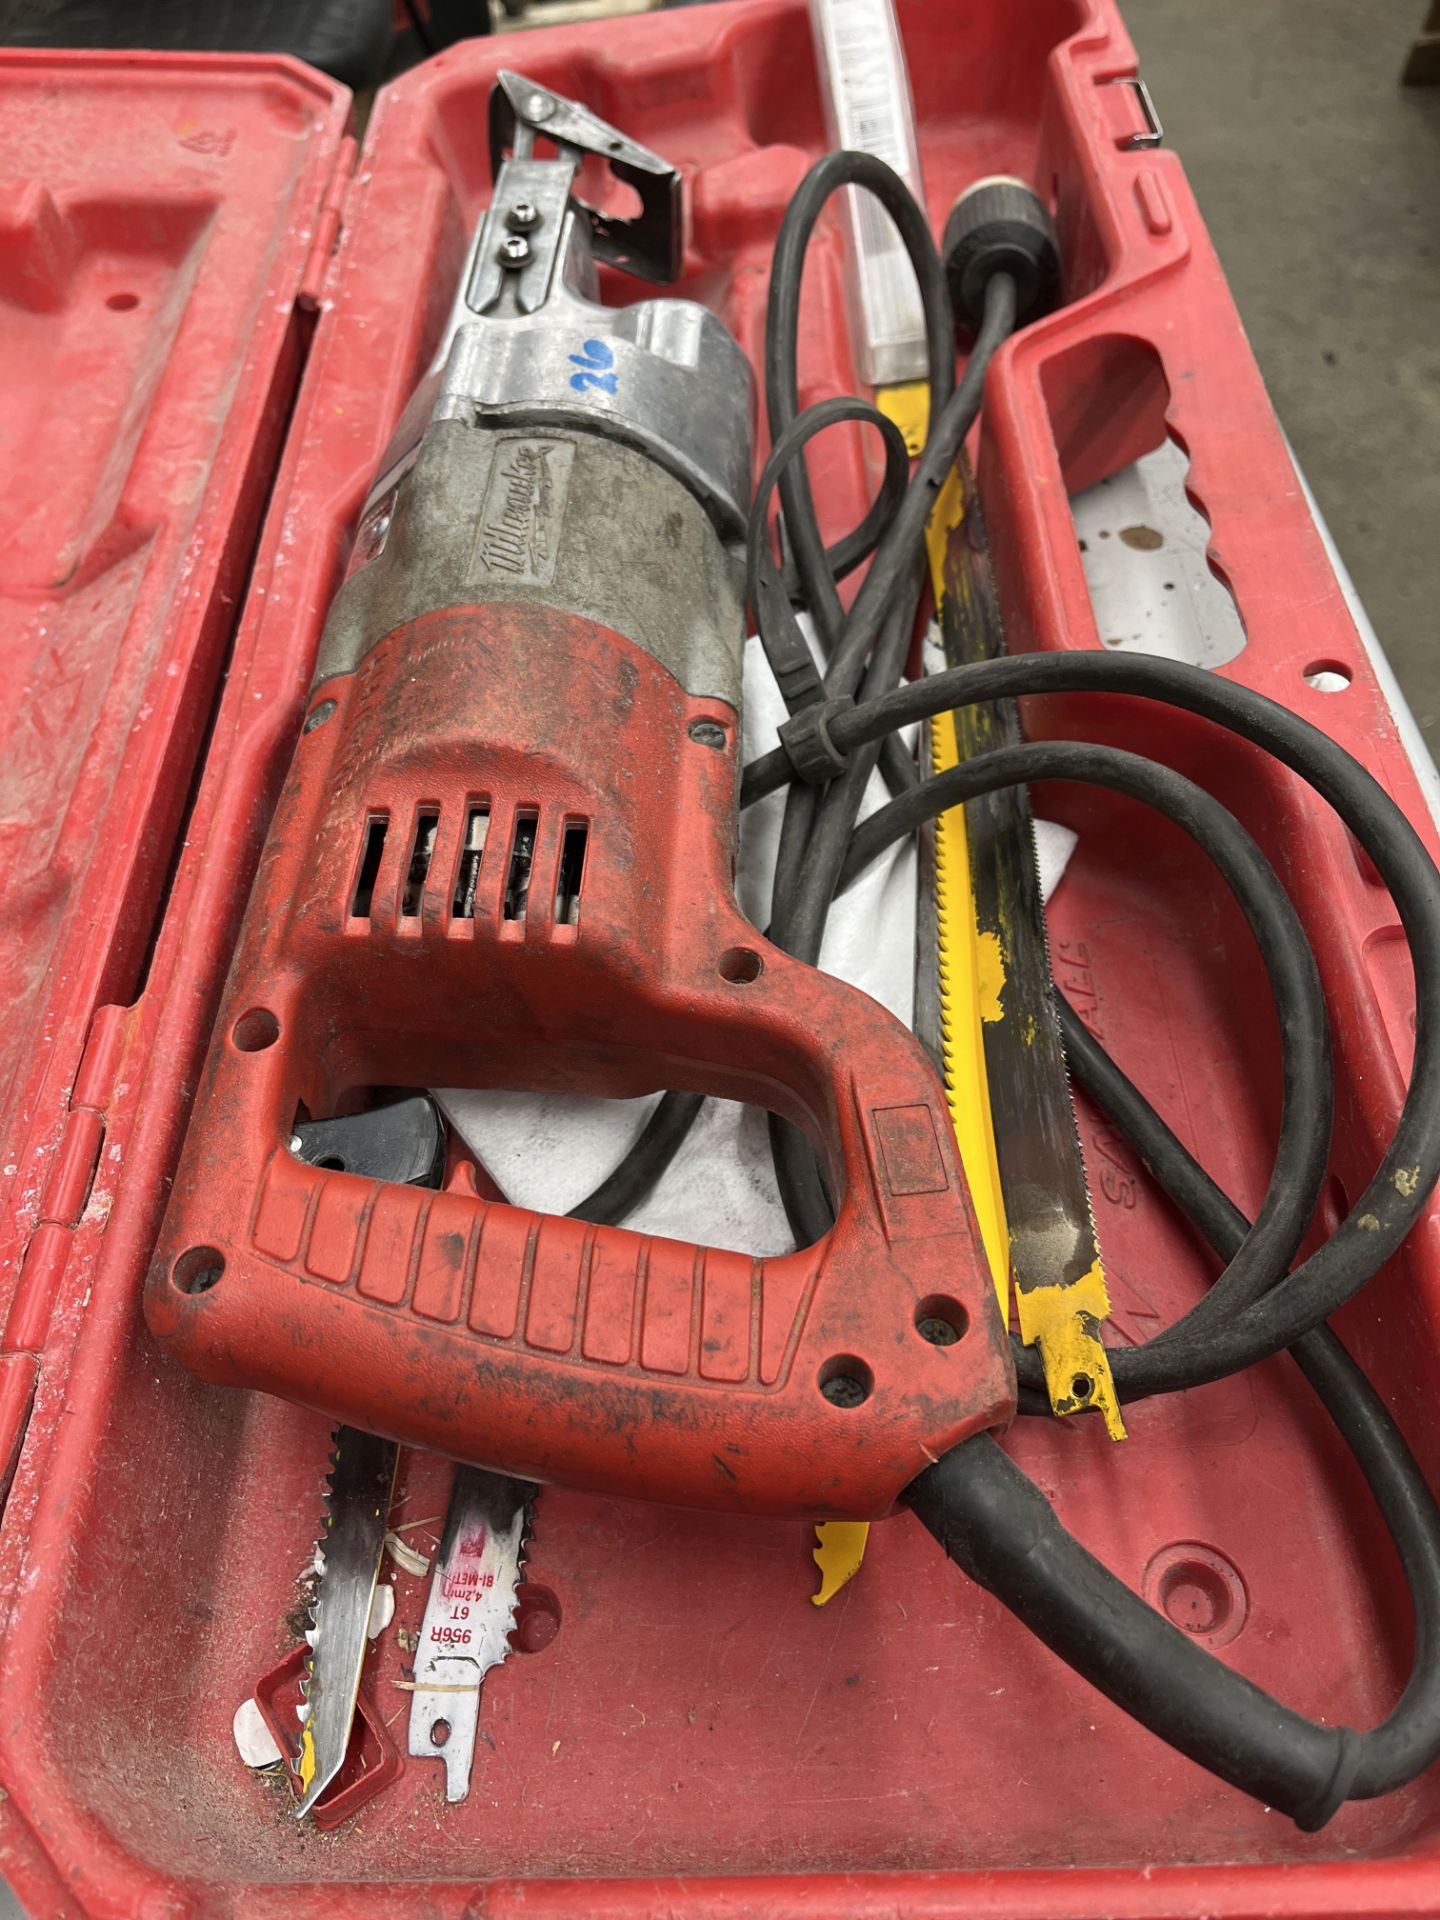 MILWAUKEE MODEL 6509-21 SAWZALL RECIPROCATING POWER SAW;S /N 96ZE602320675, 60/120 VOLT IN CASE - Image 4 of 5